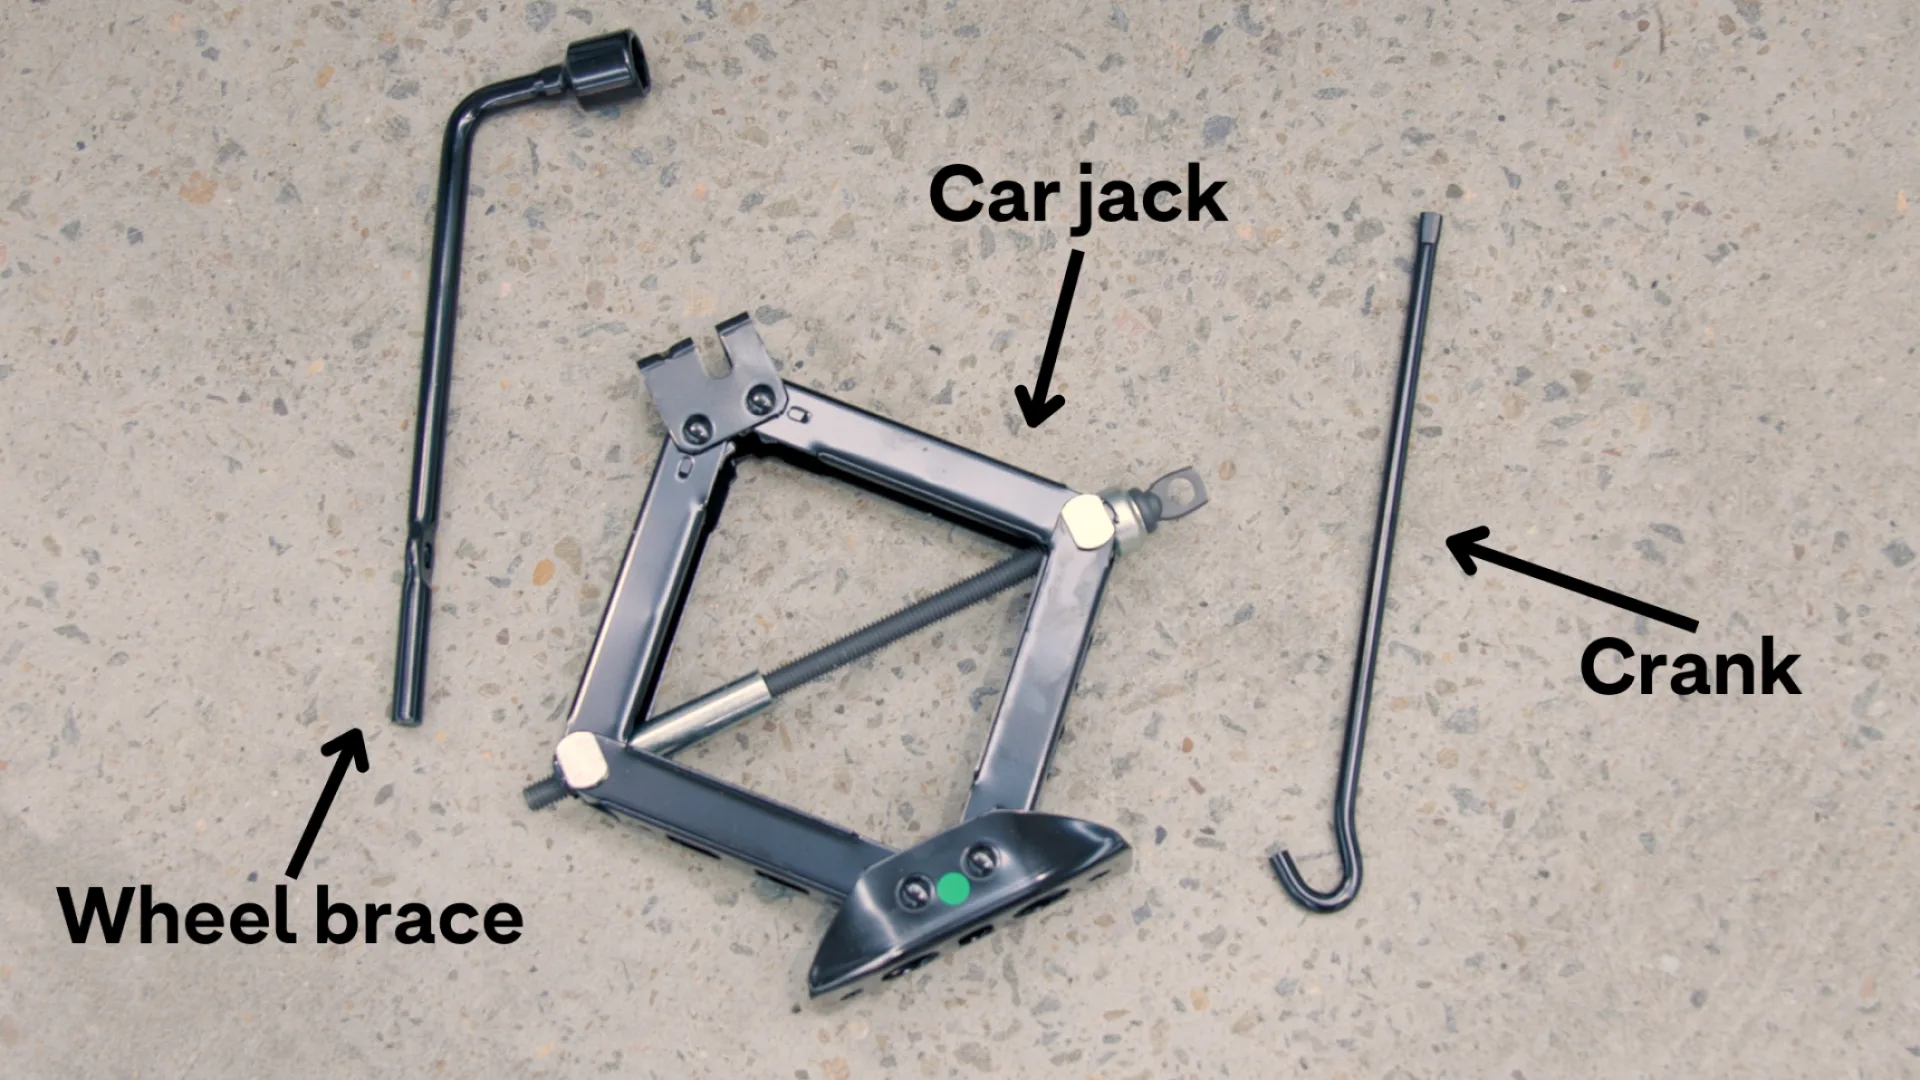 What you'll need to change a car tyre: a car jack, wheel brace and crank